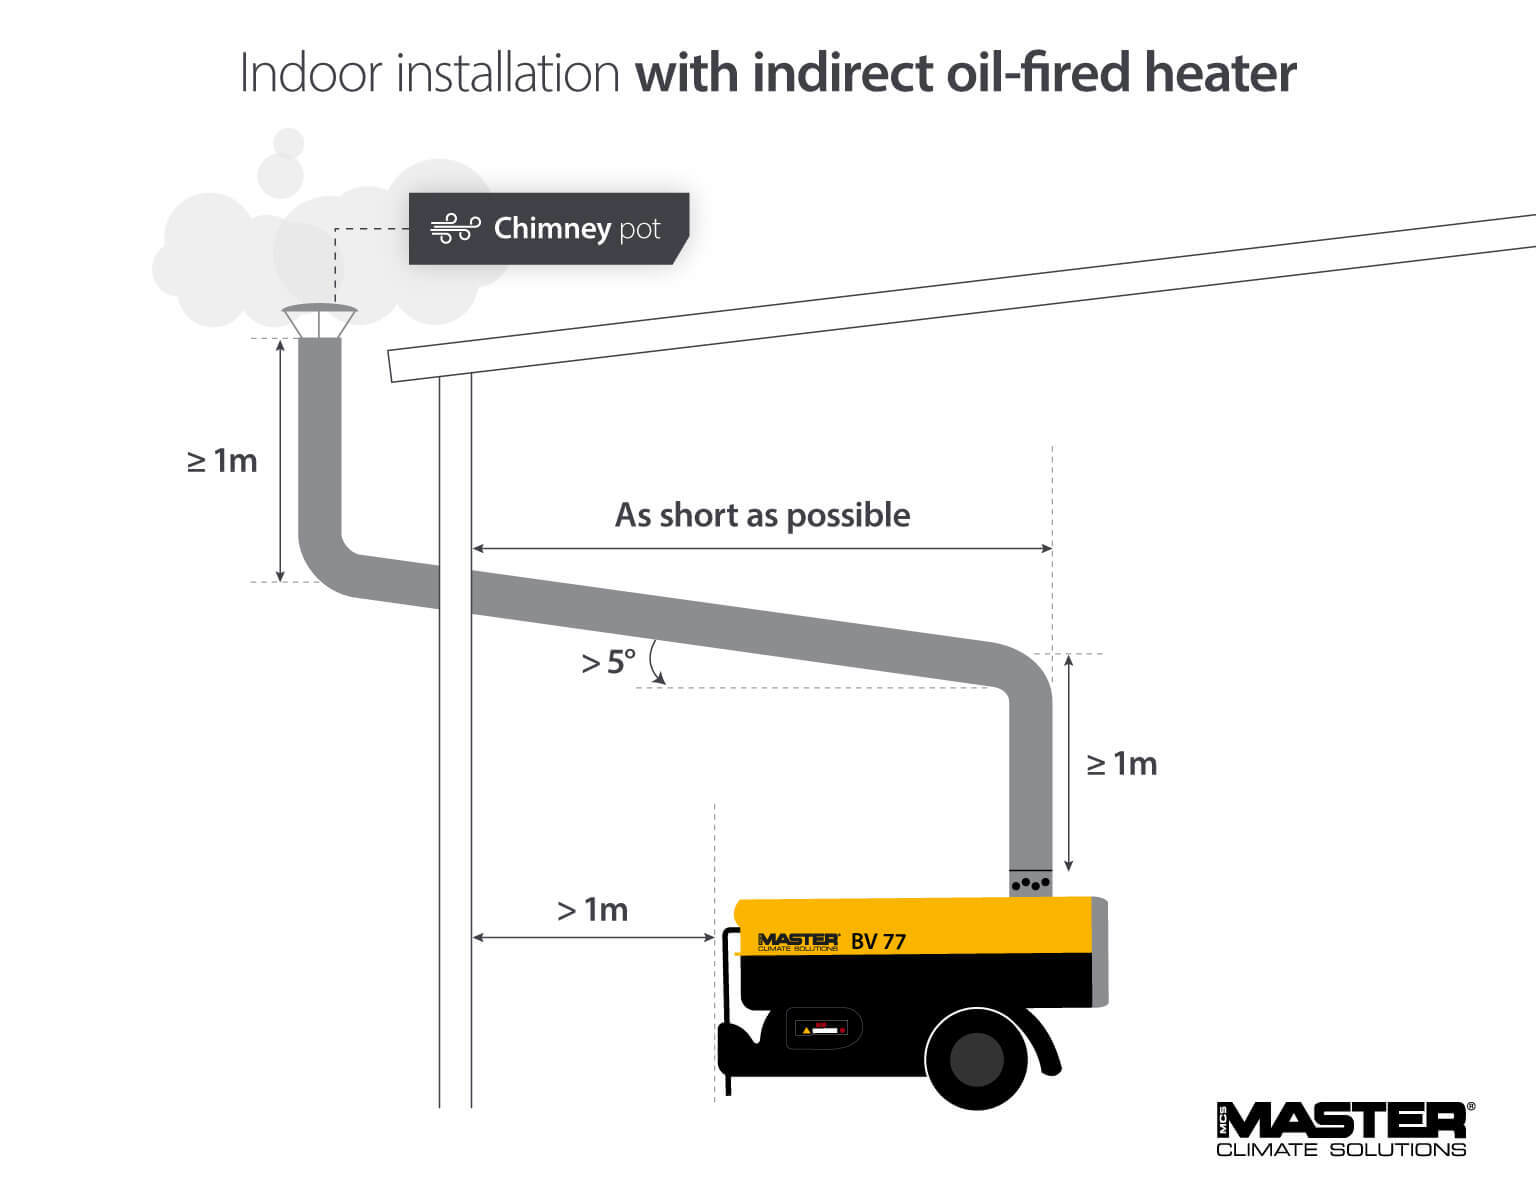 Infographic showcasing inside installation of an Indirect Oil-fired Heater with chimney pot for a tent or marquee